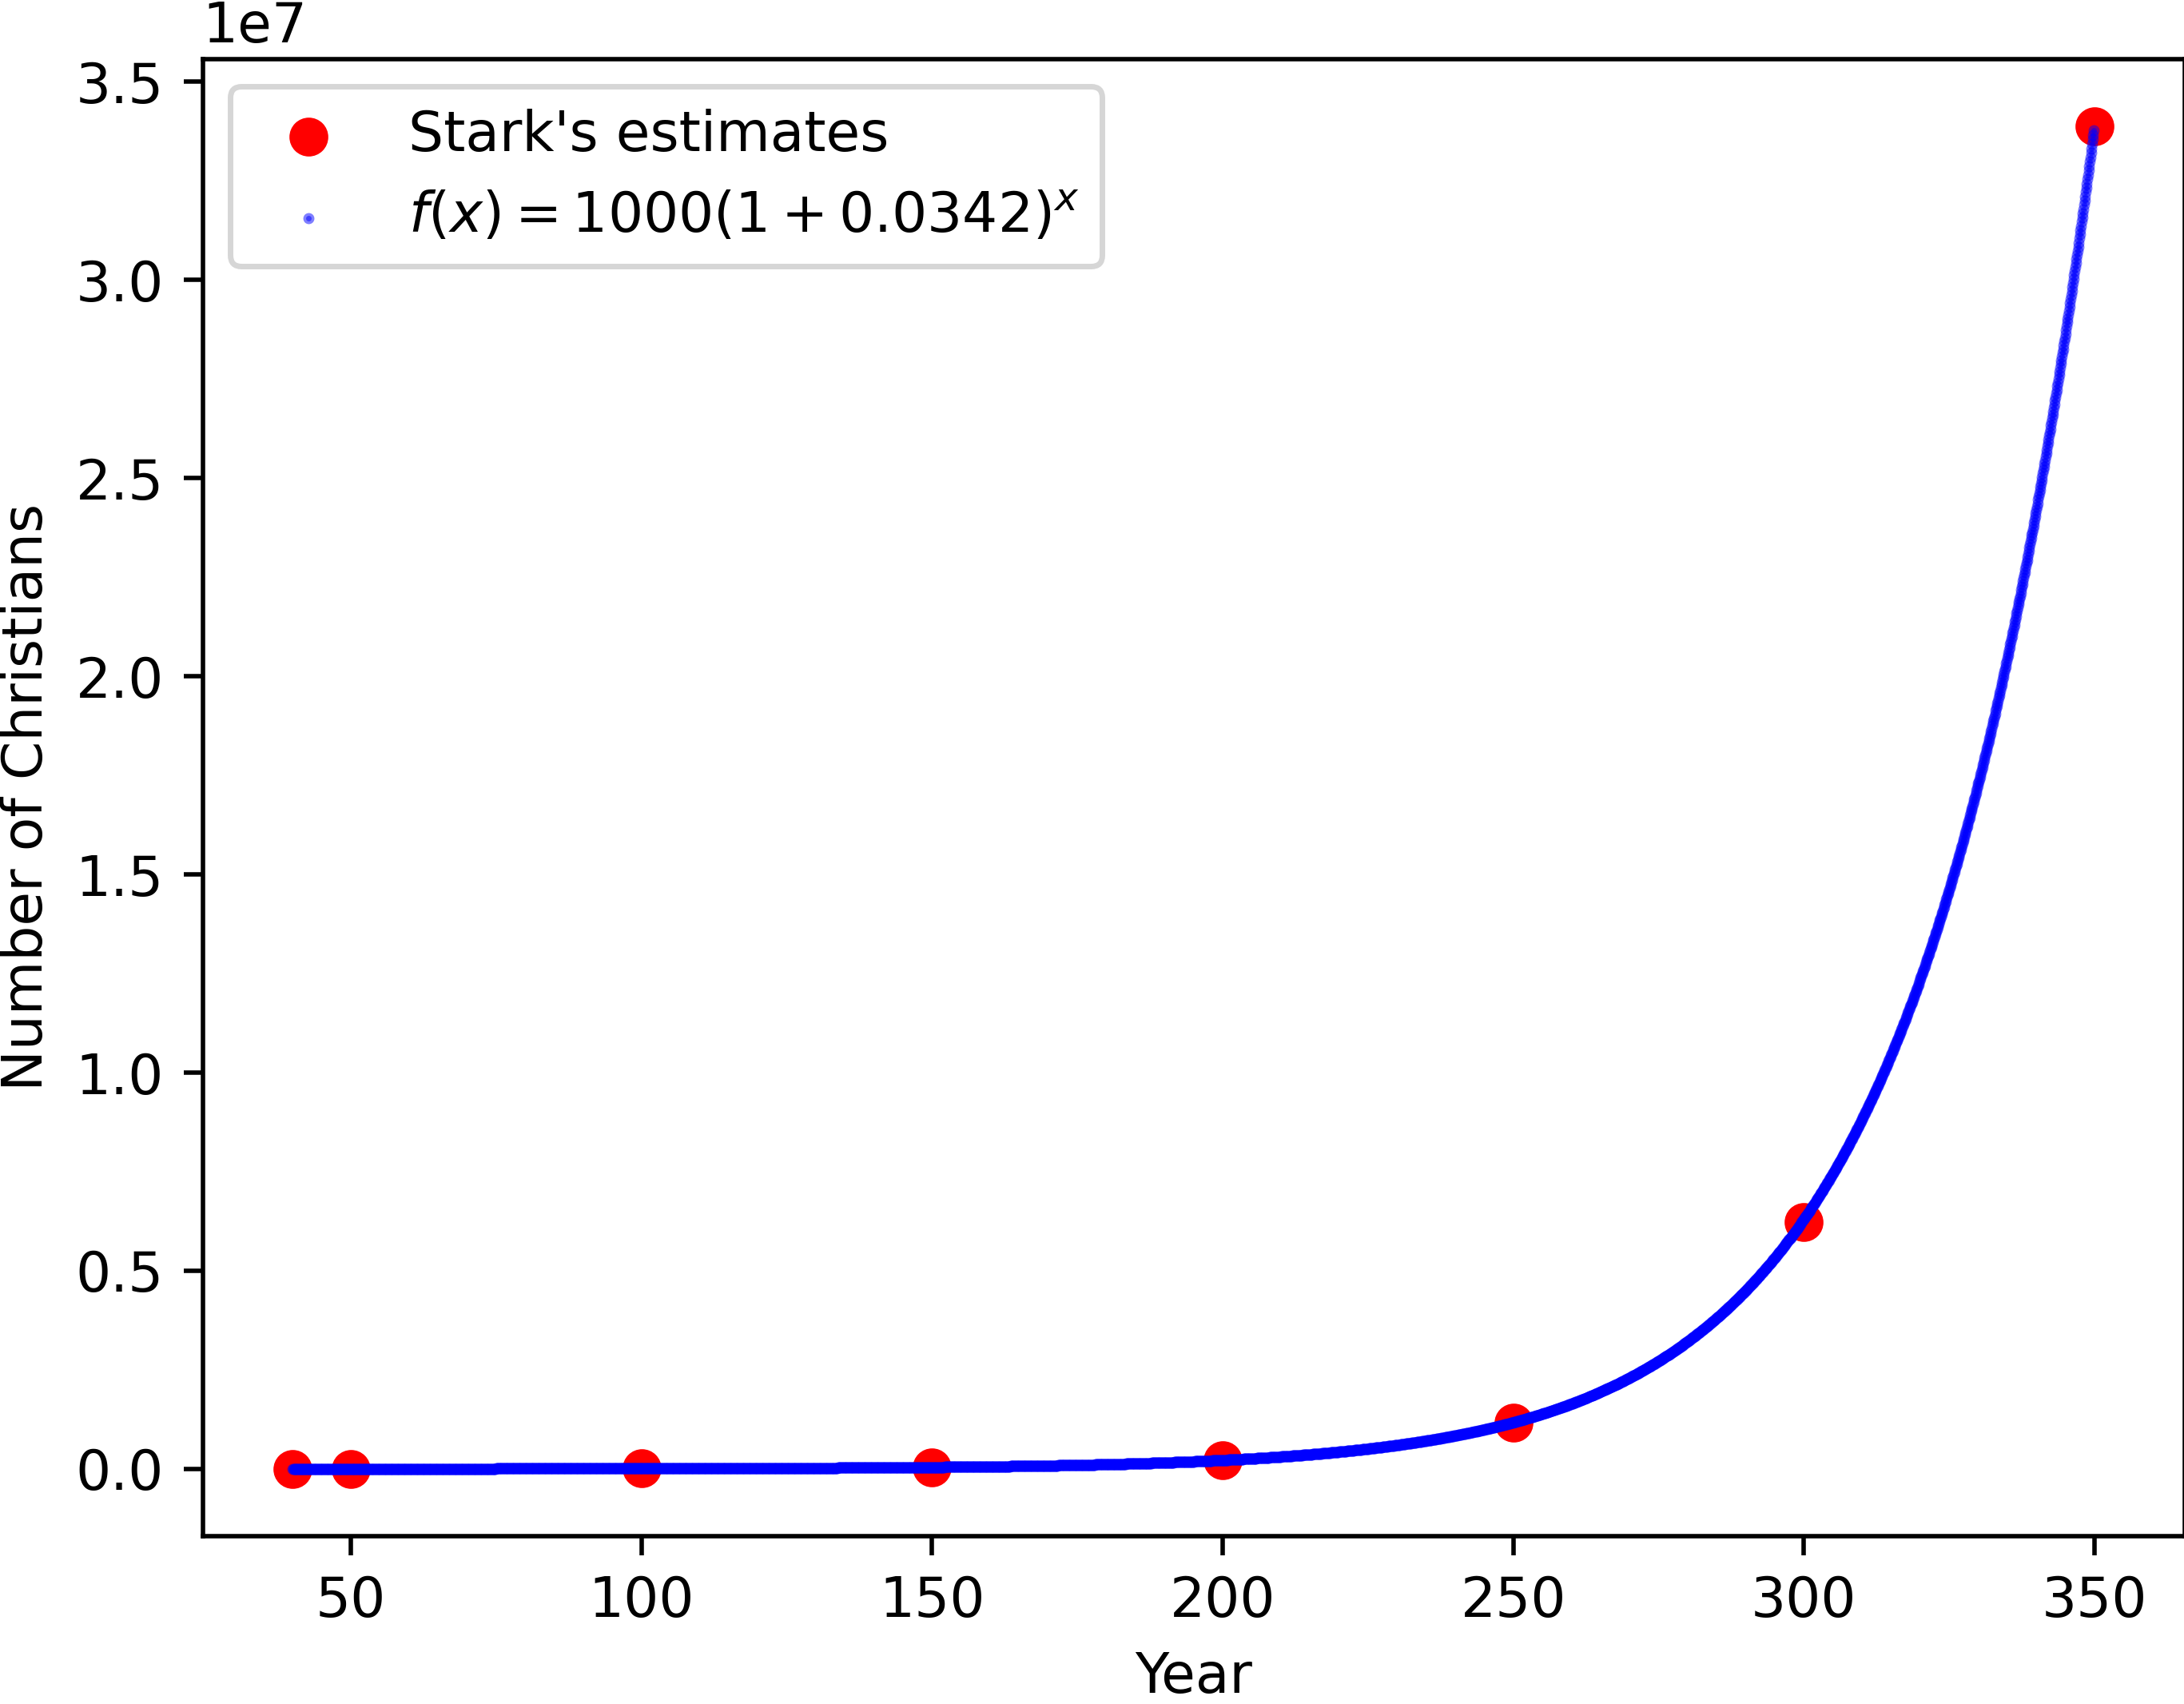 Figure 1. Exponential growth for Stark&rsquo;s estimates